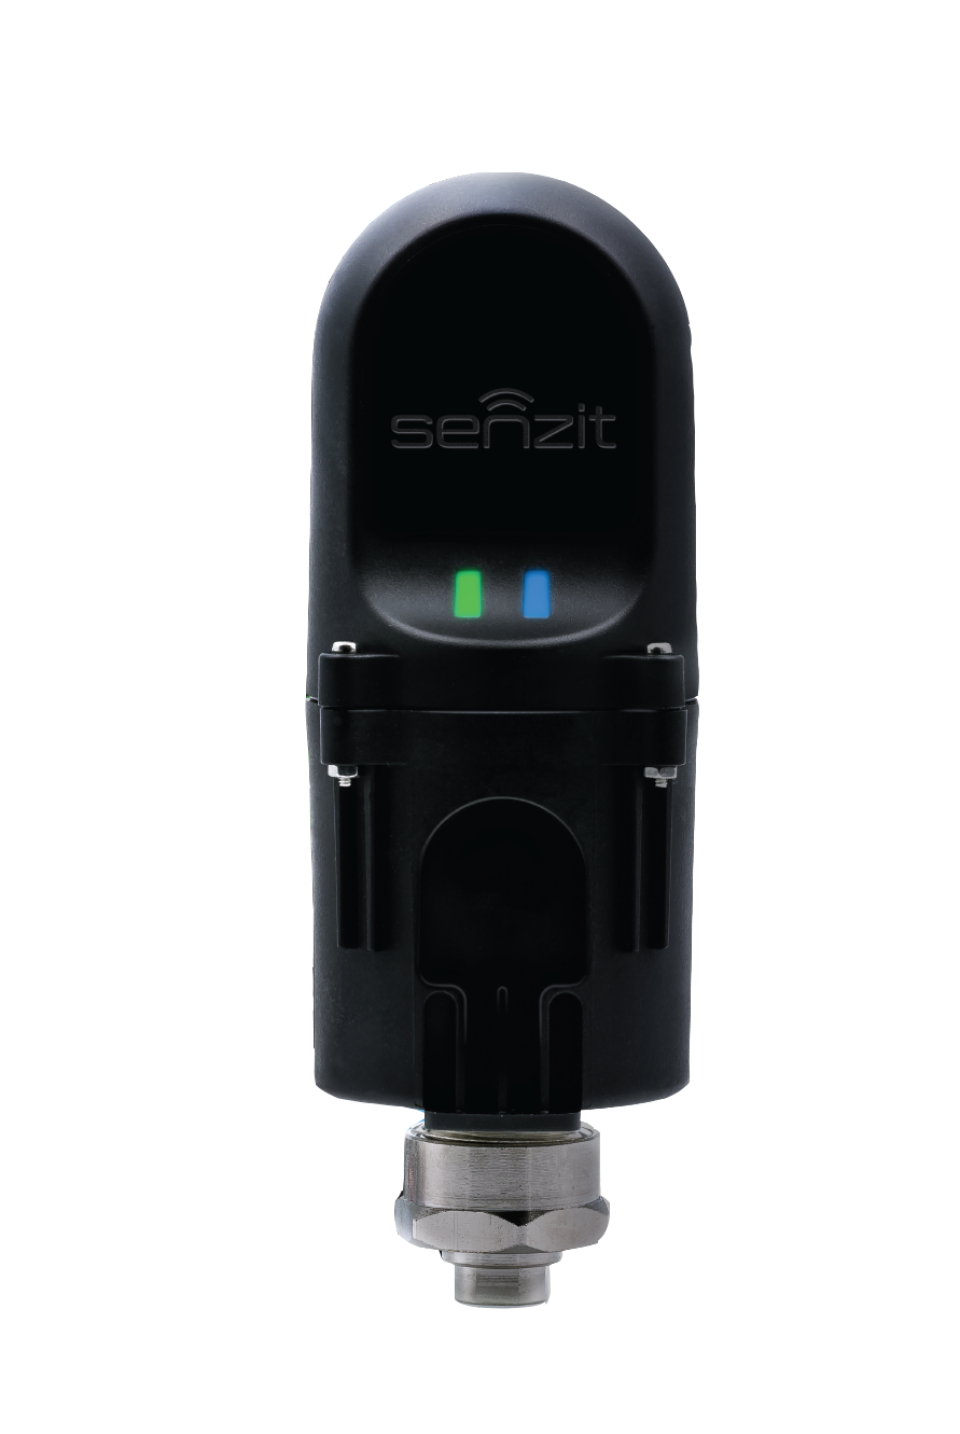 Senzit's sleek product, installable on any piece of equipment!